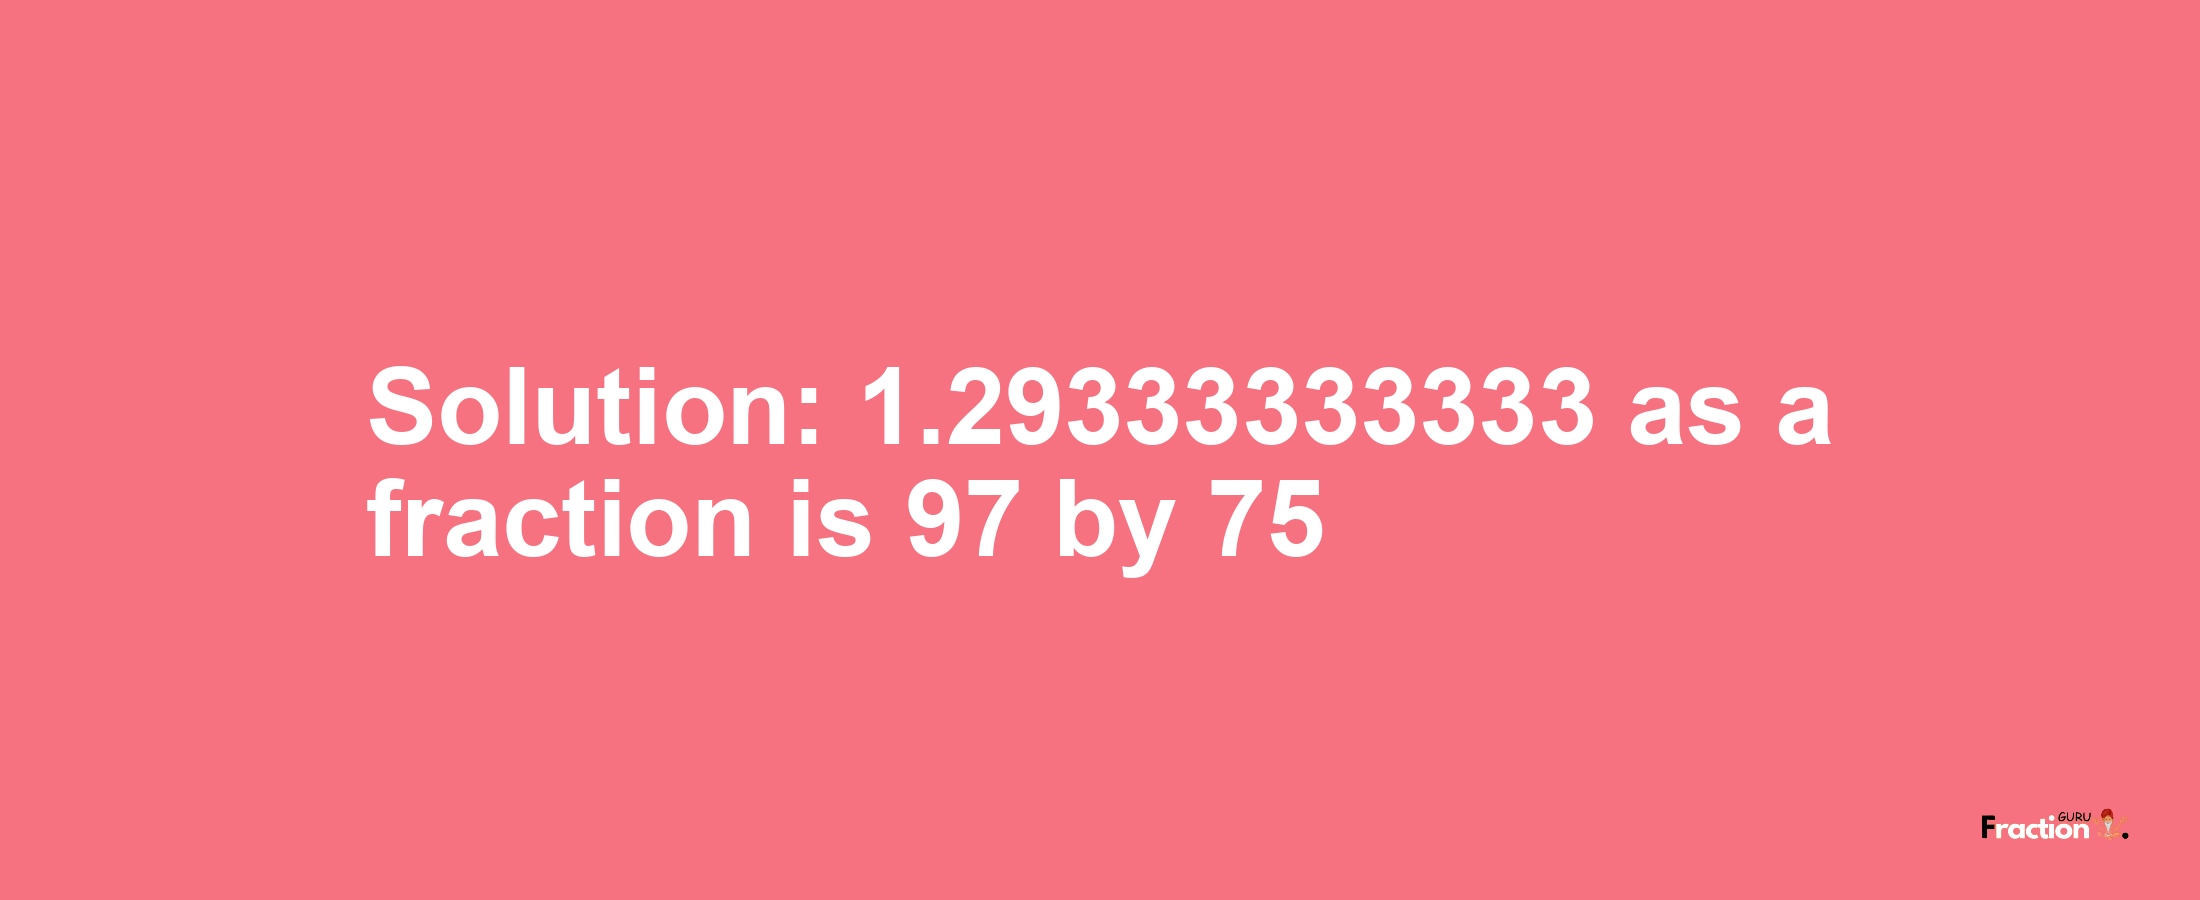 Solution:1.29333333333 as a fraction is 97/75